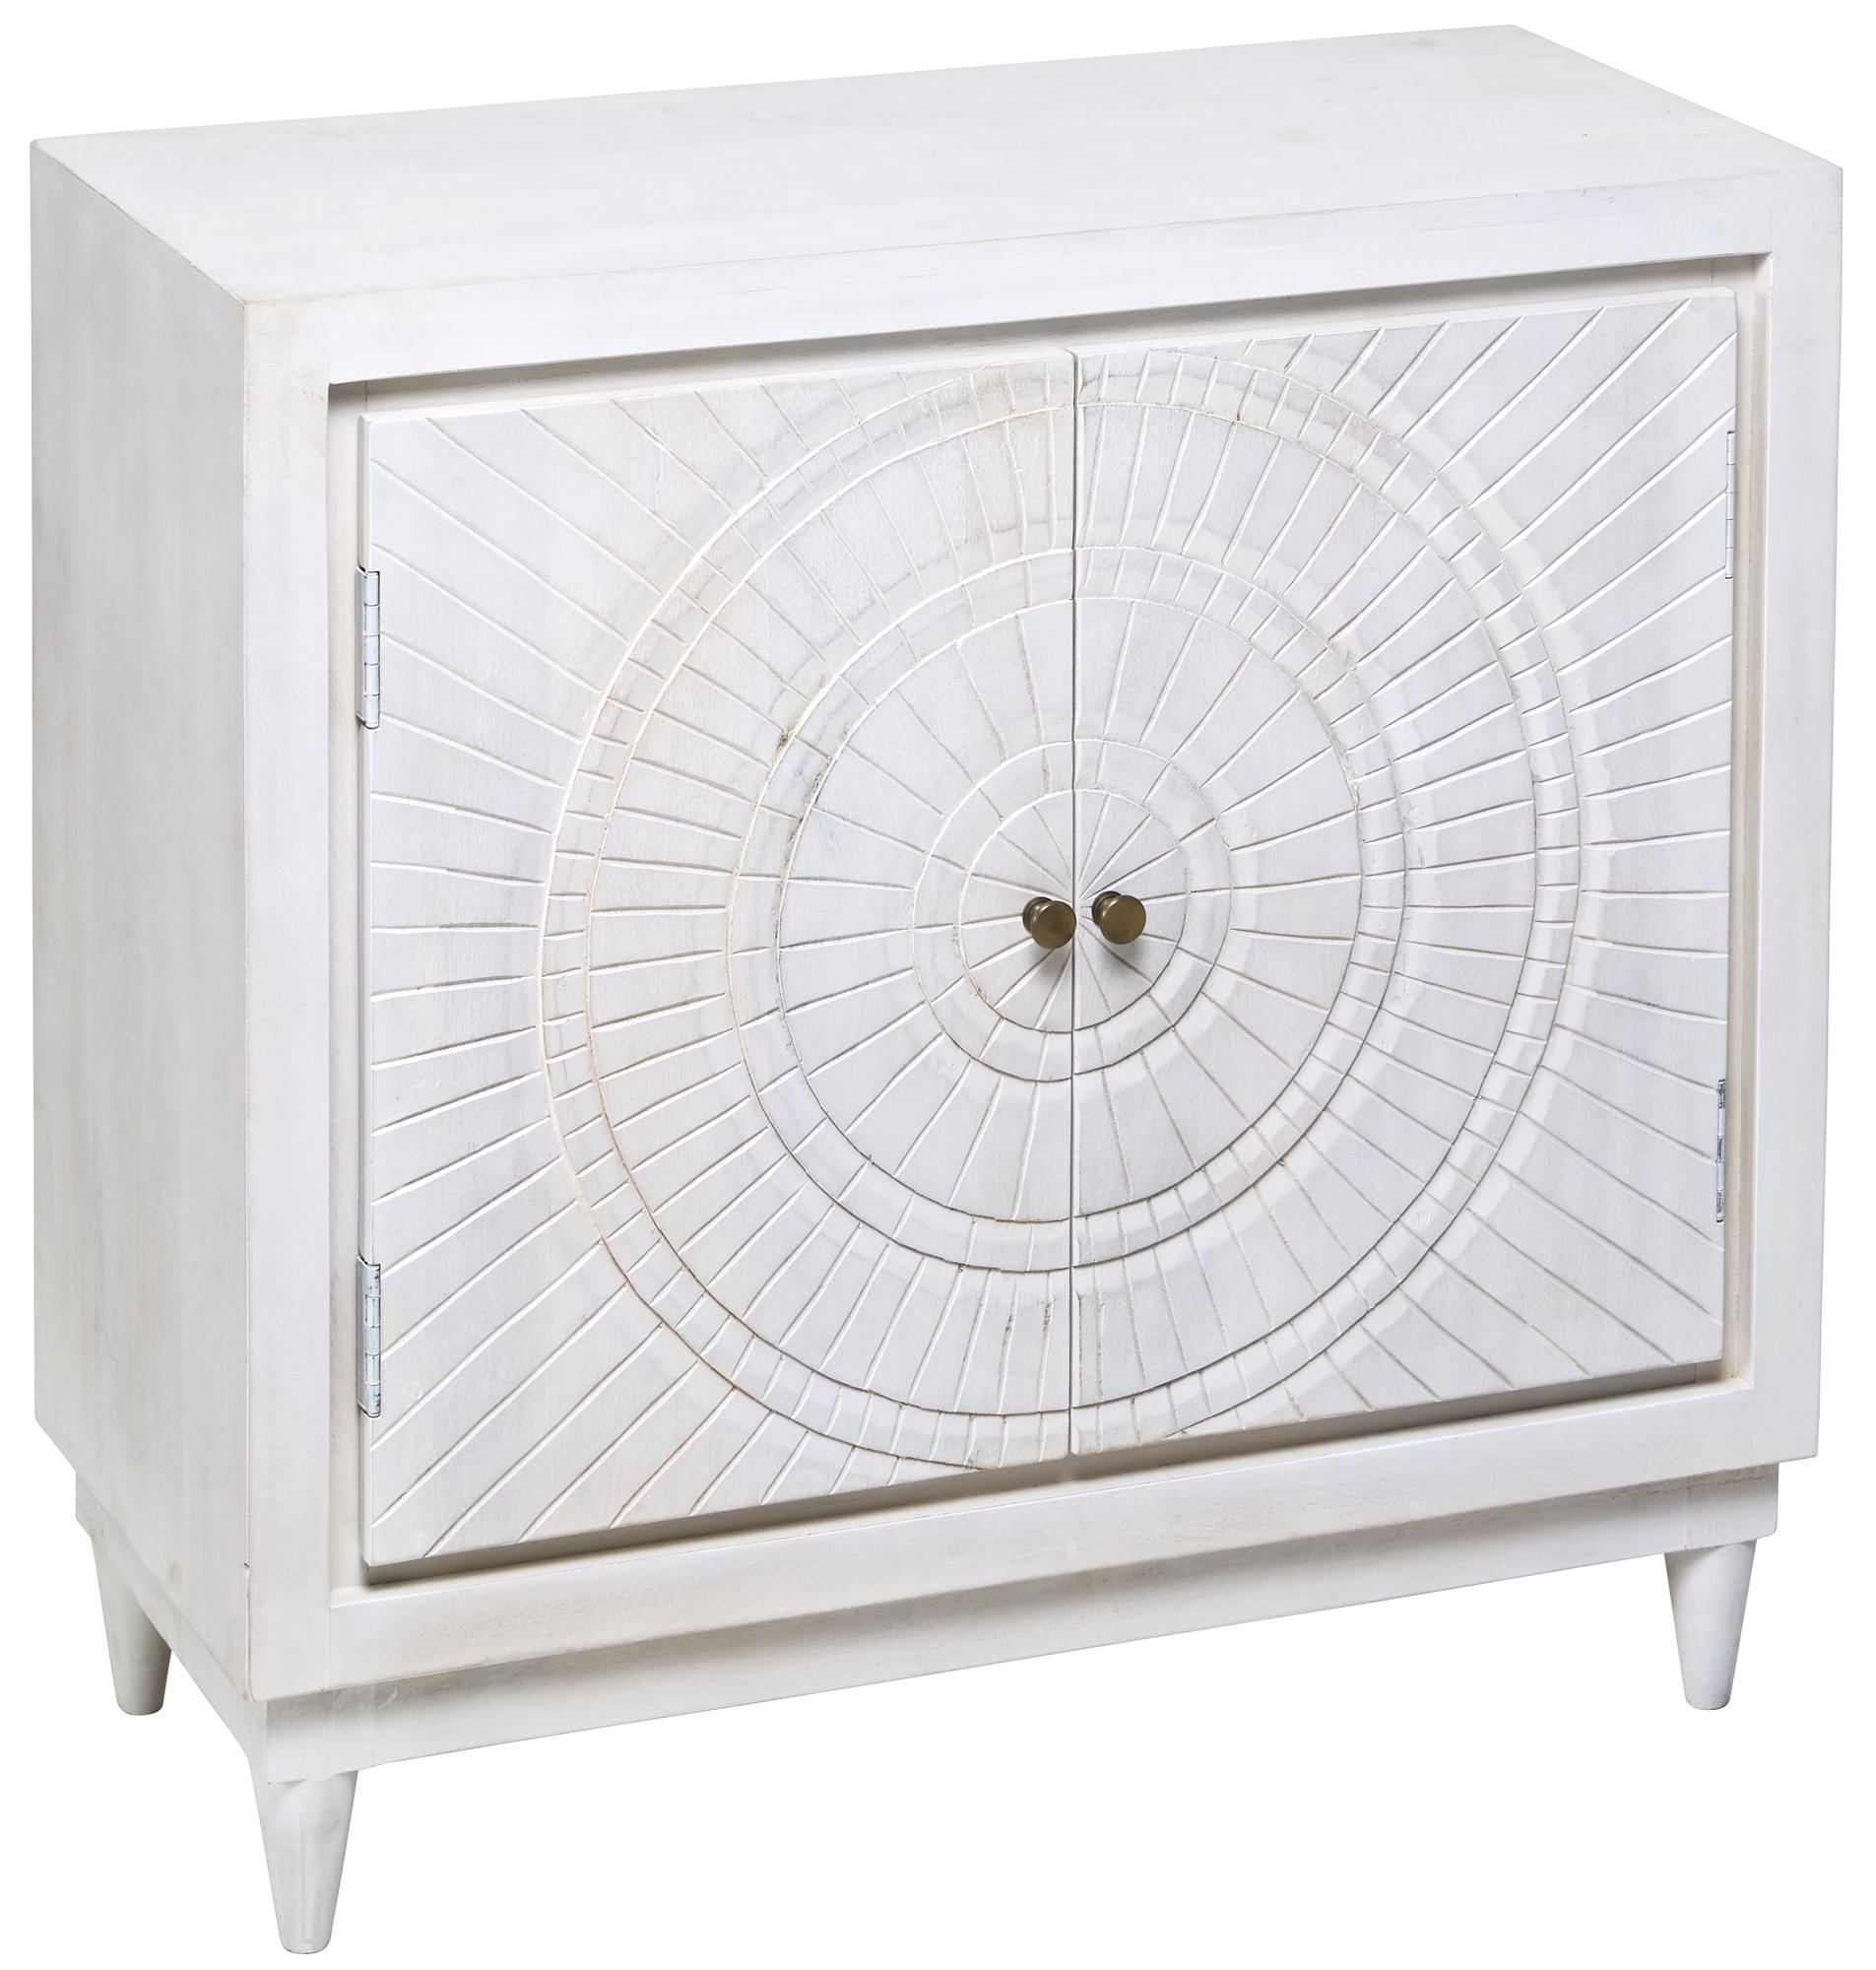 Transitional Cabinet EIP-11461 Lucent EIP-11461 in whitewash 